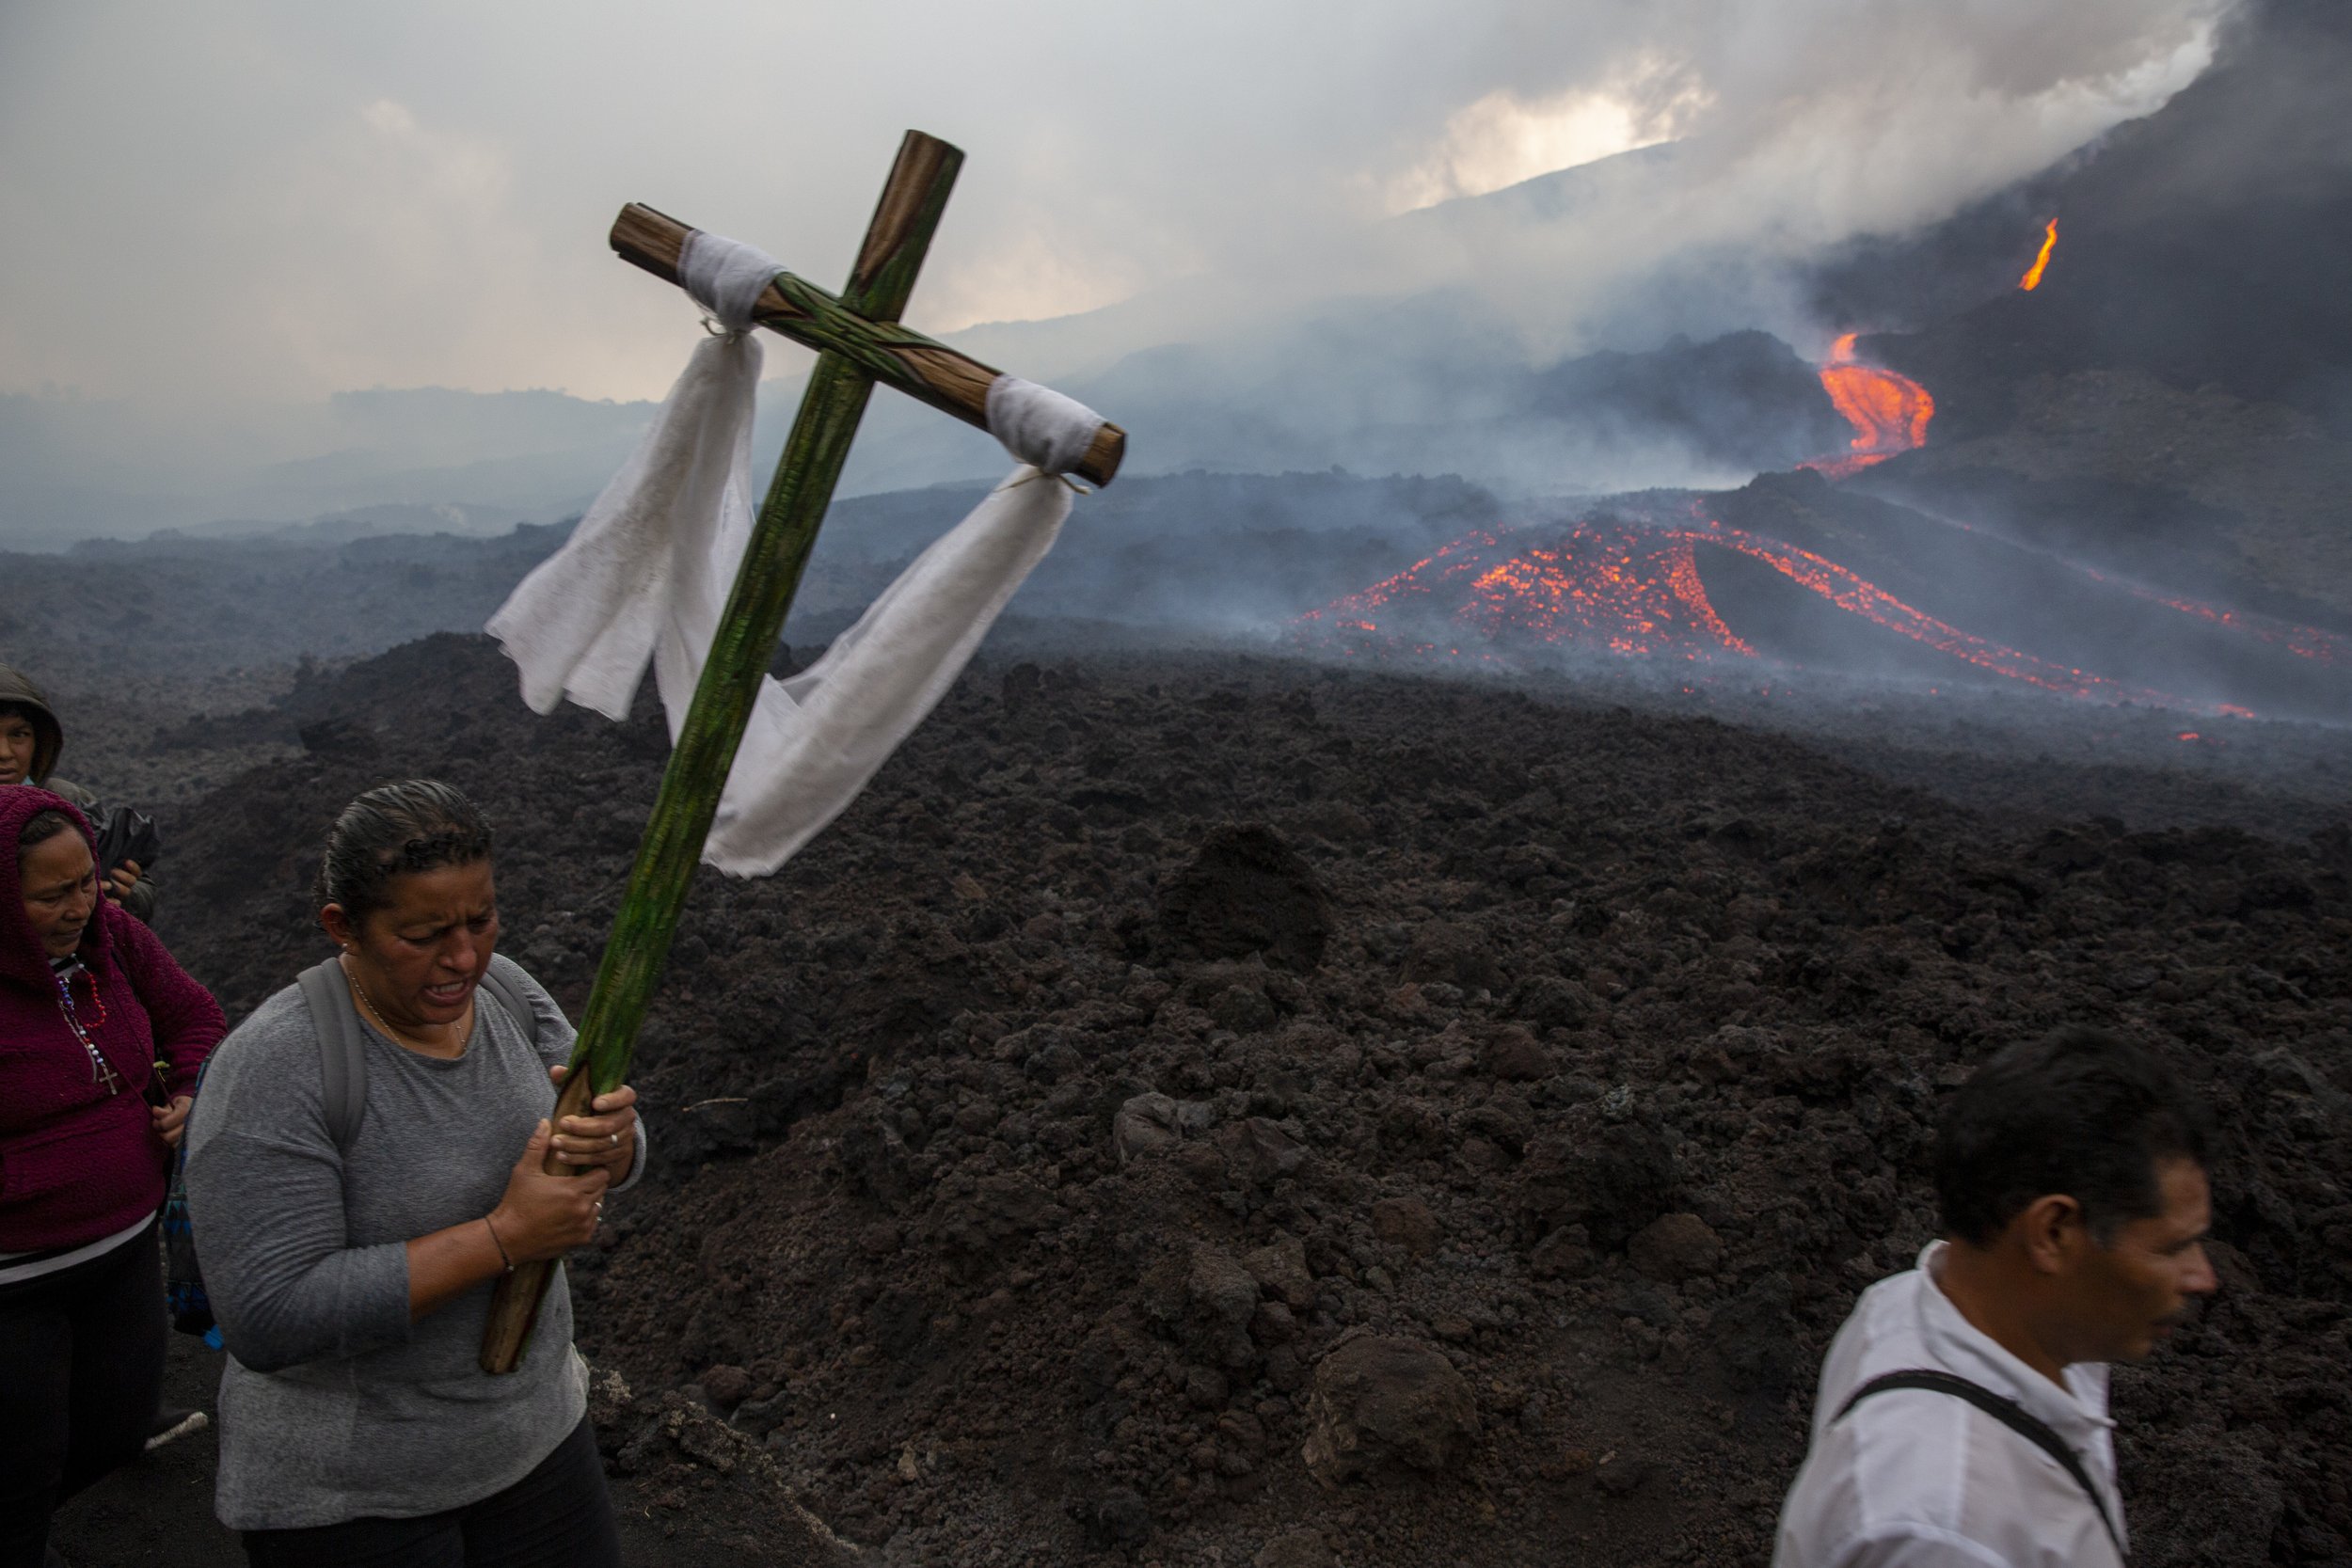  A woman carries a wooden cross during a pilgrimage to pray that the Pacaya volcano decreases its activity, in San Vicente Pacaya, Guatemala, on May 5, 2021. The volcano, just 50 kilometers (31 miles) south of Guatemala's capital, became more active 